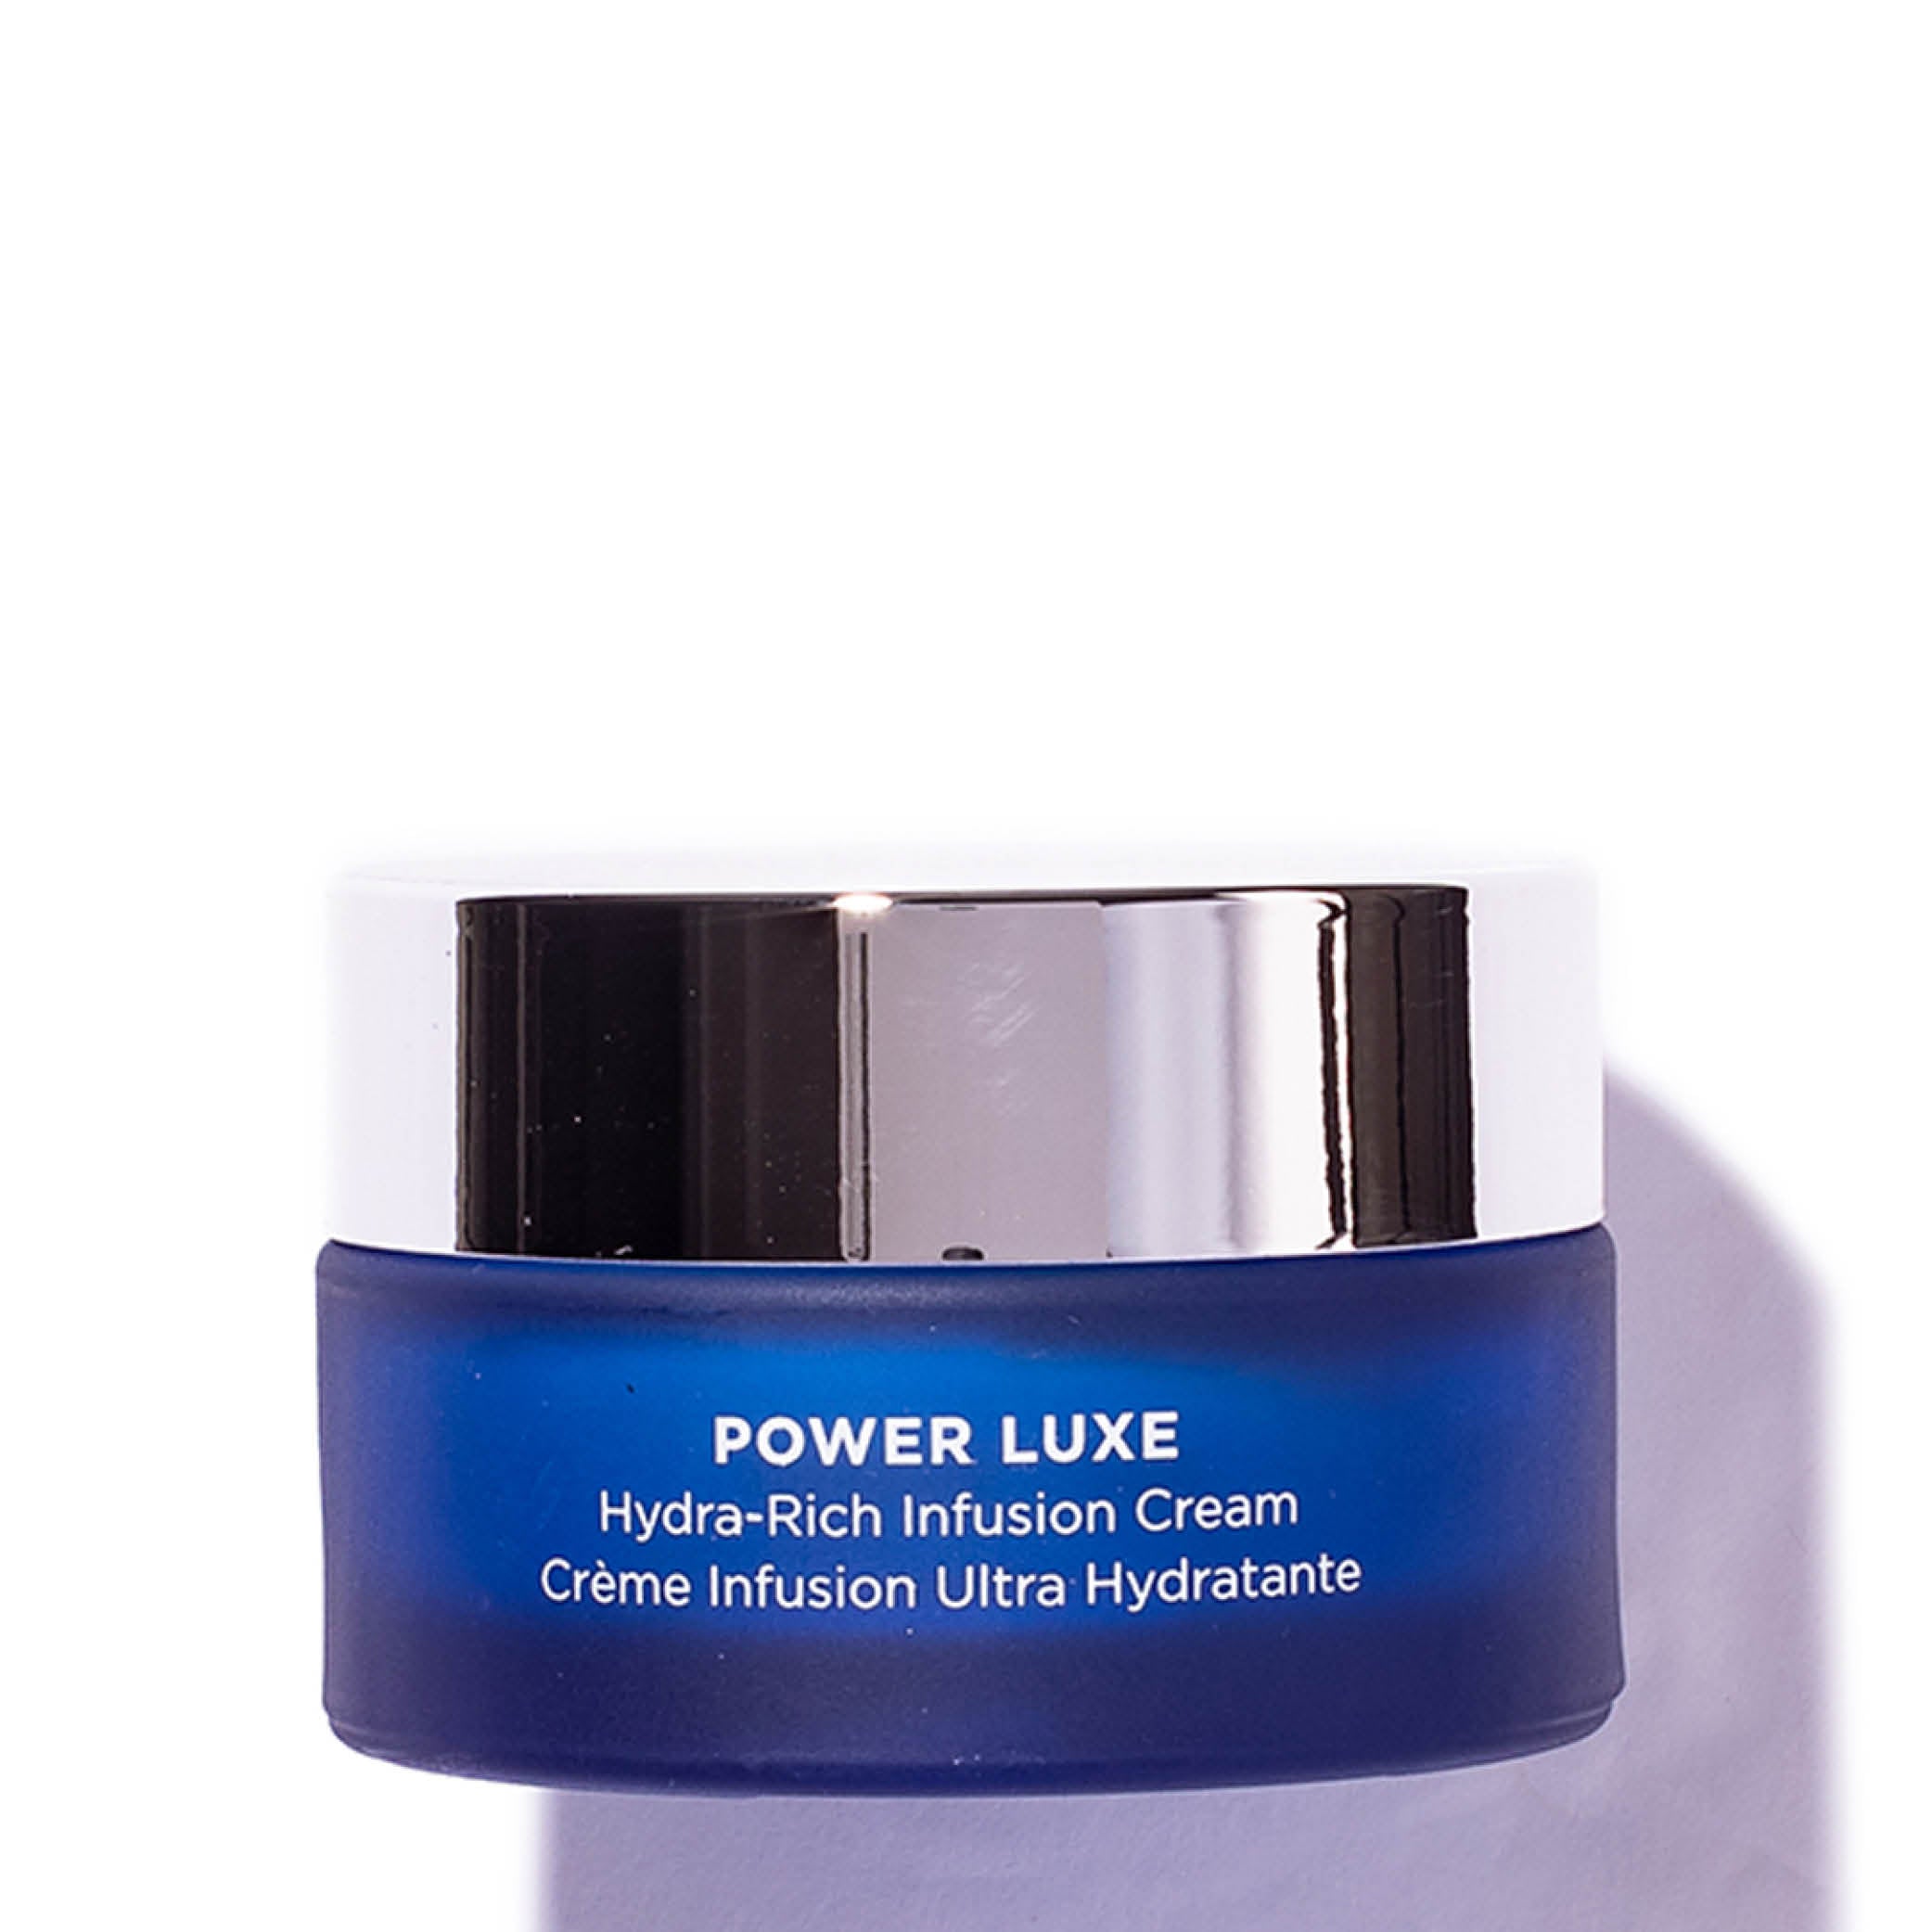 Power Luxe - Crème infusion ultra hydratante